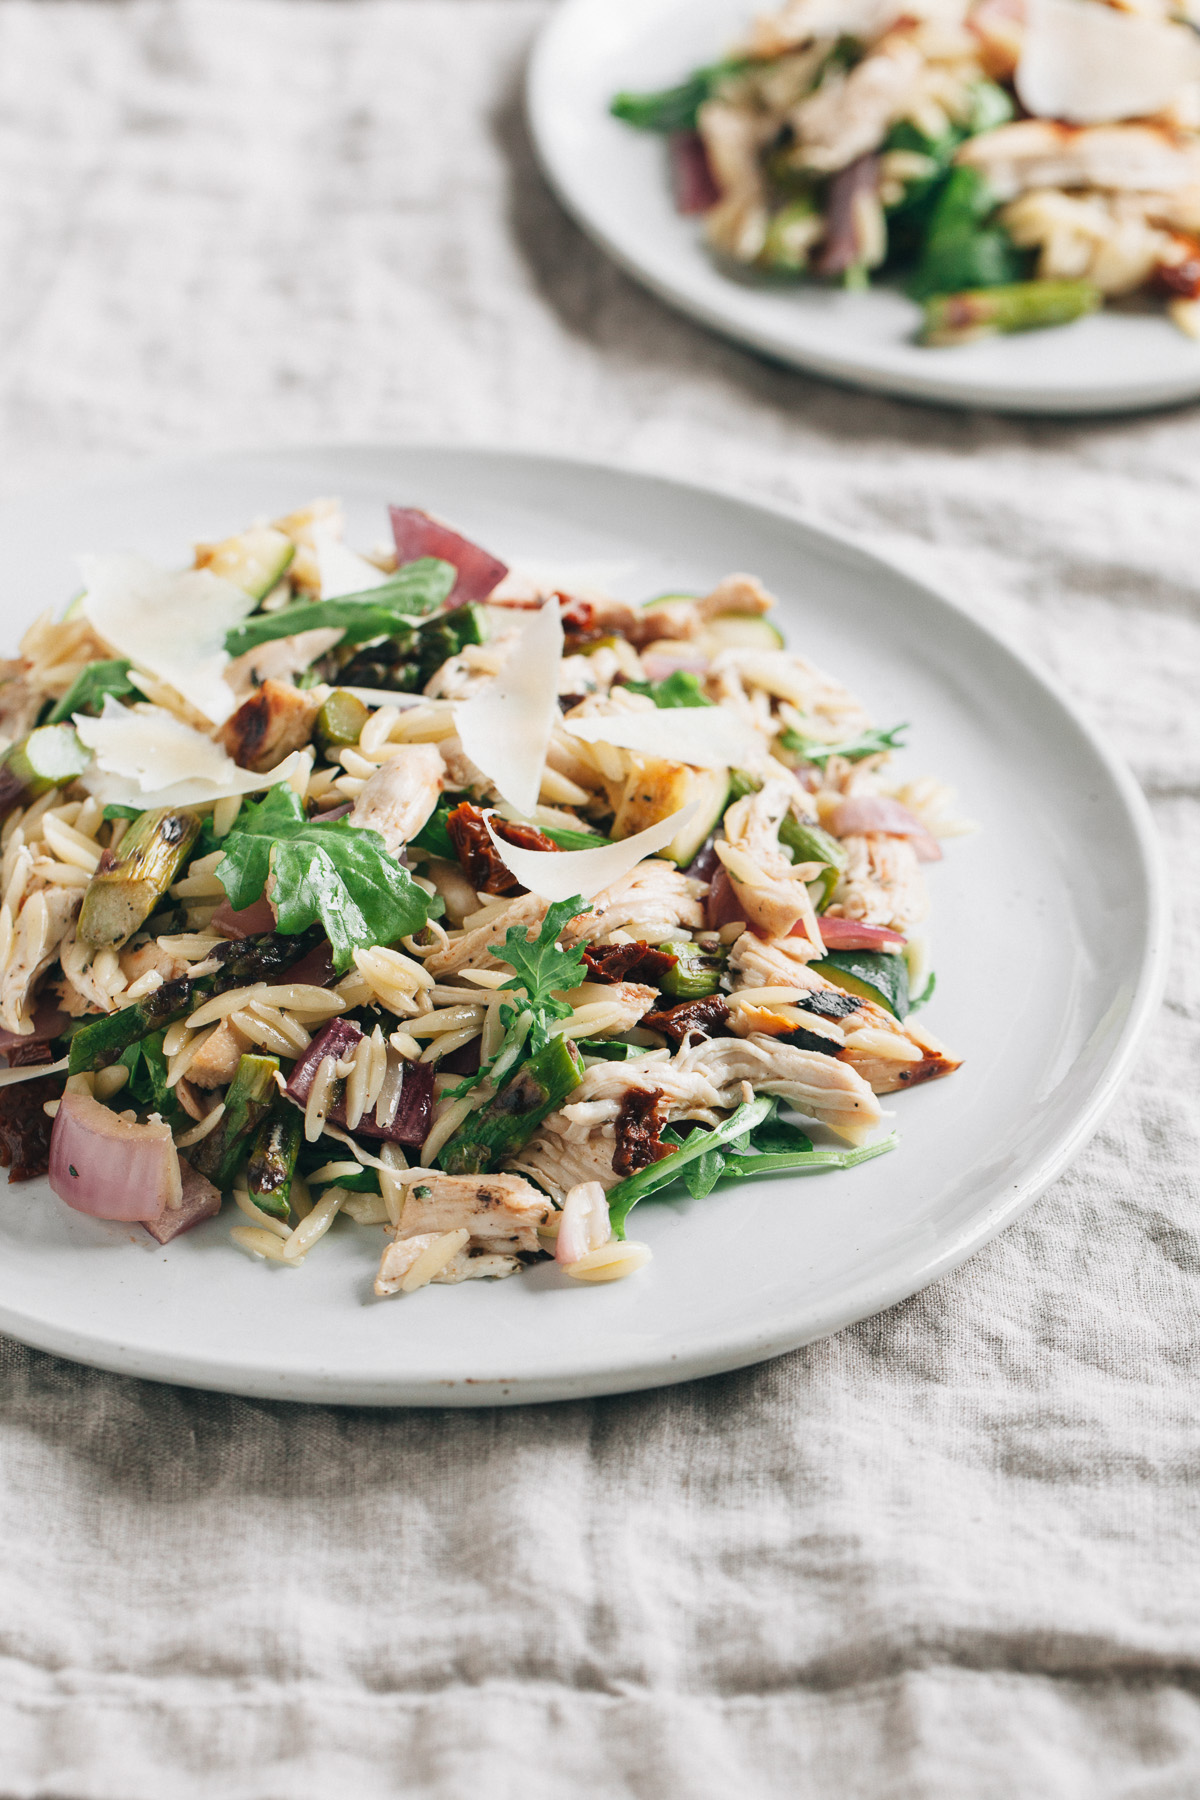 Orzo Salad with Grilled Vegetables and Chicken